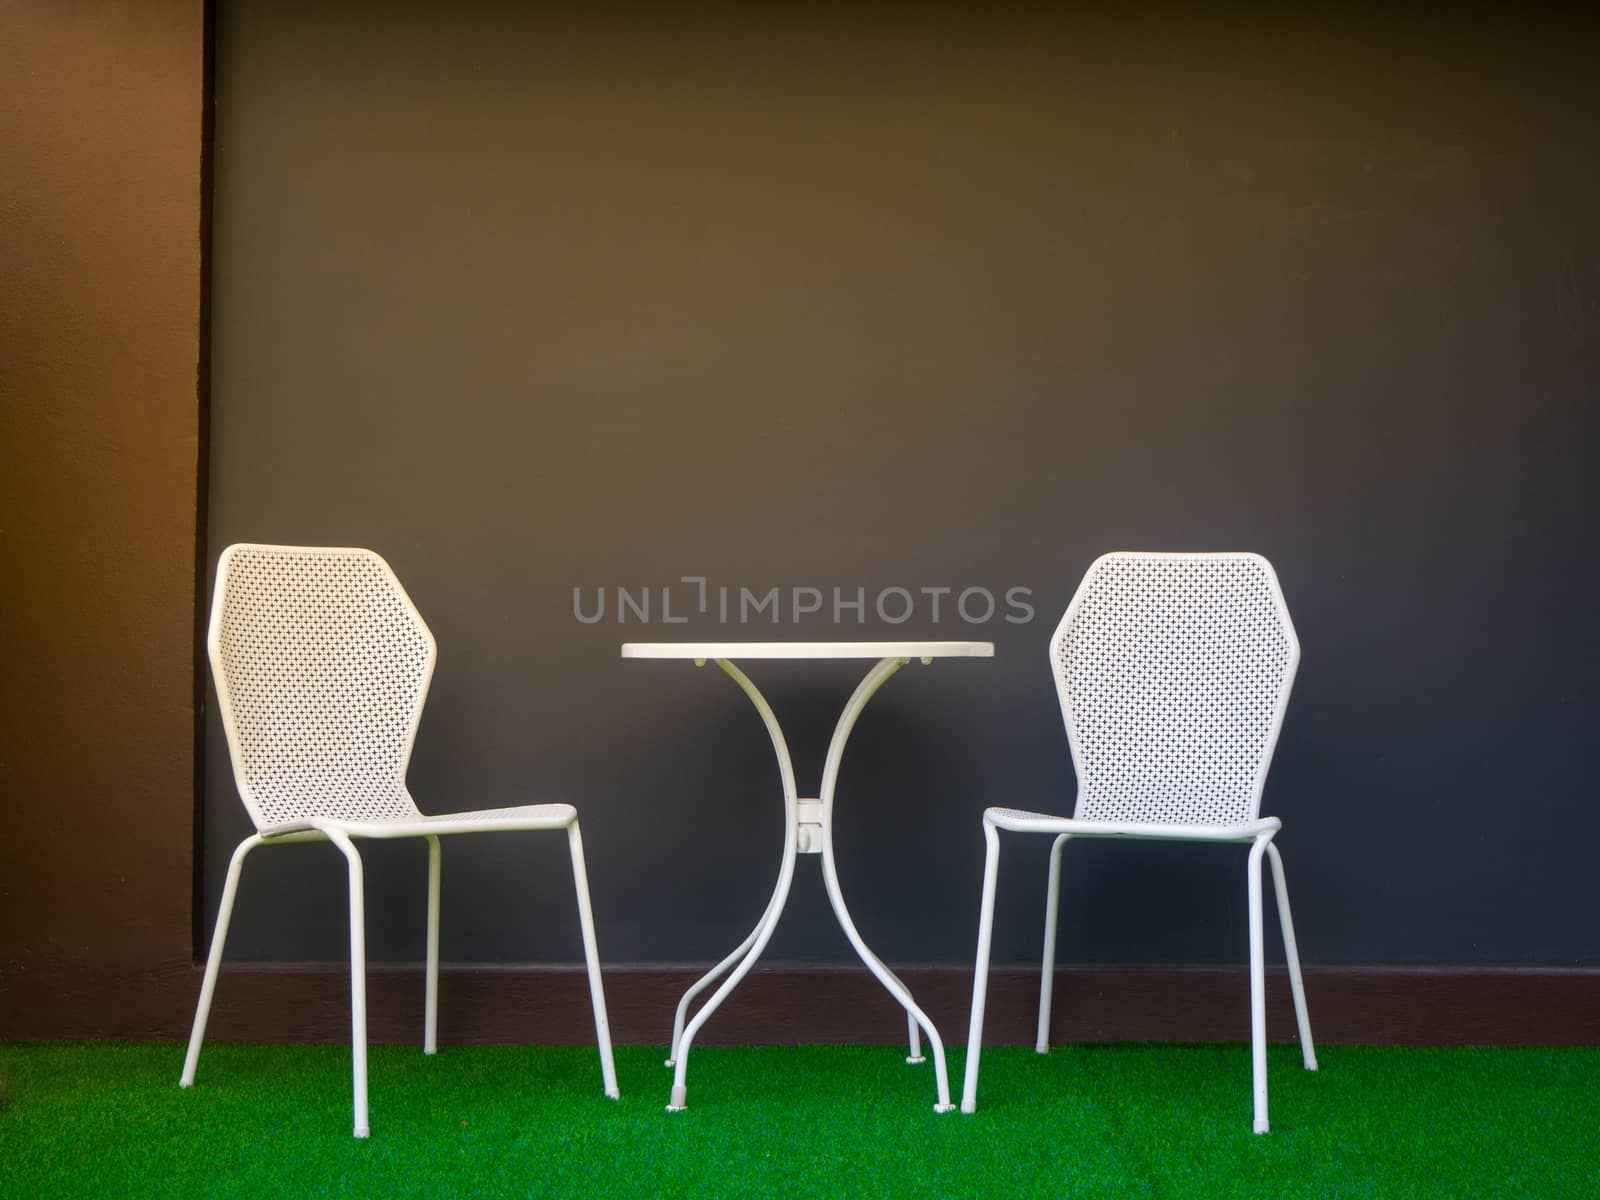 the tables and chairs in front of soft blue wall - Image by shutterbird